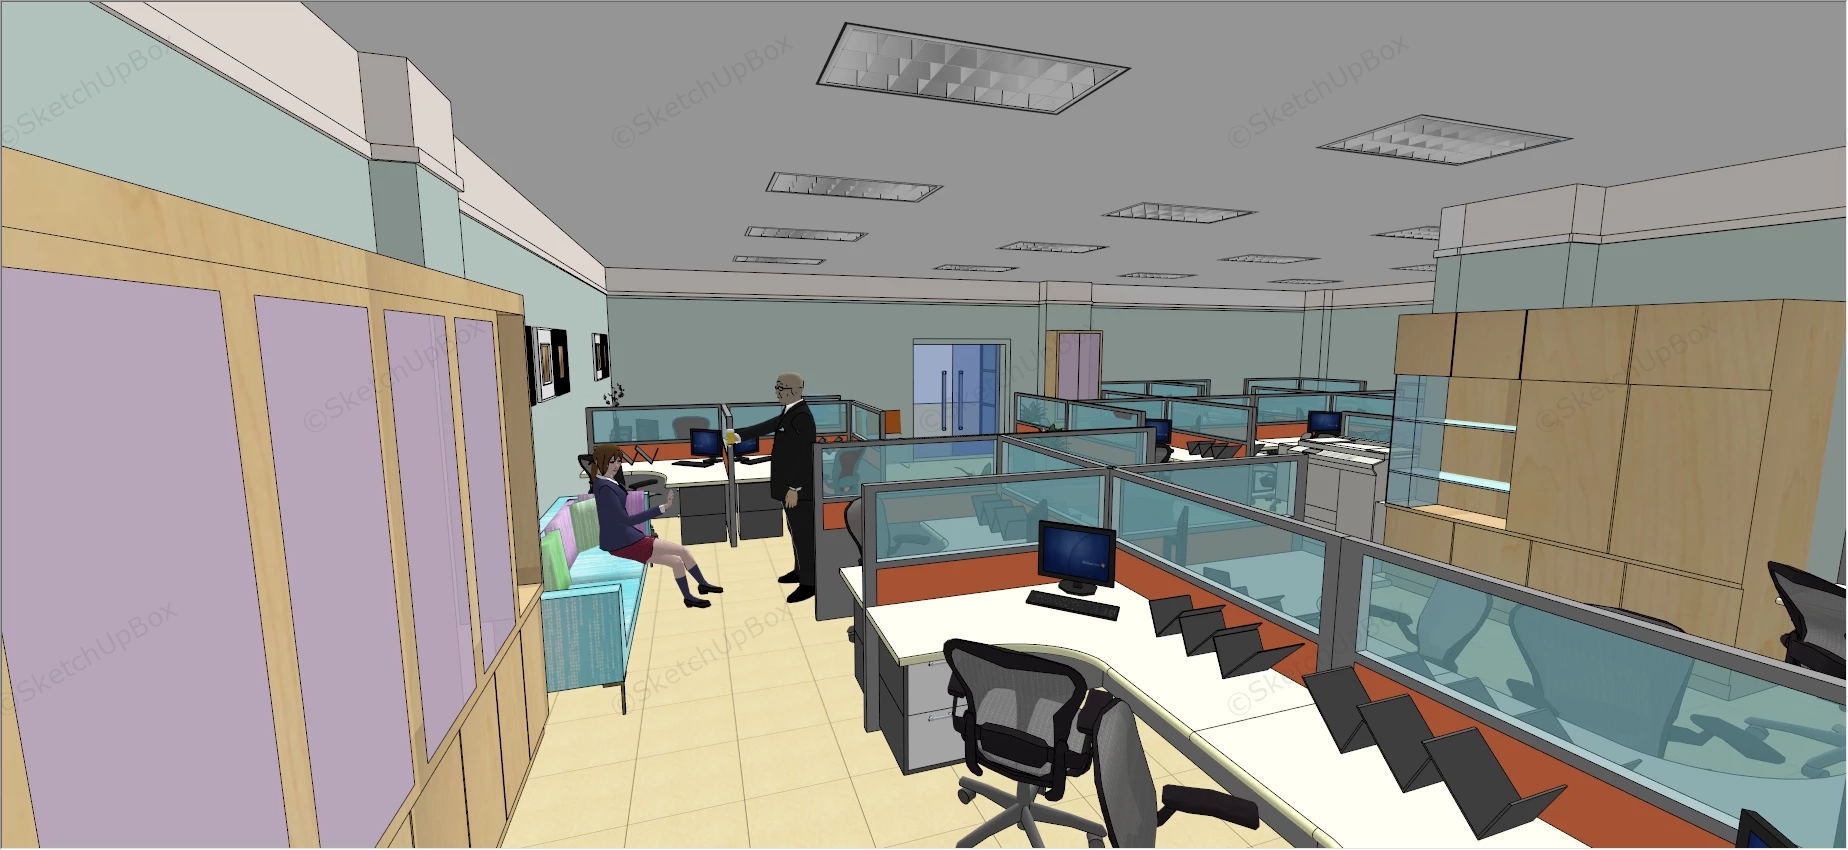 Office Space Cubicle Layout sketchup model preview - SketchupBox